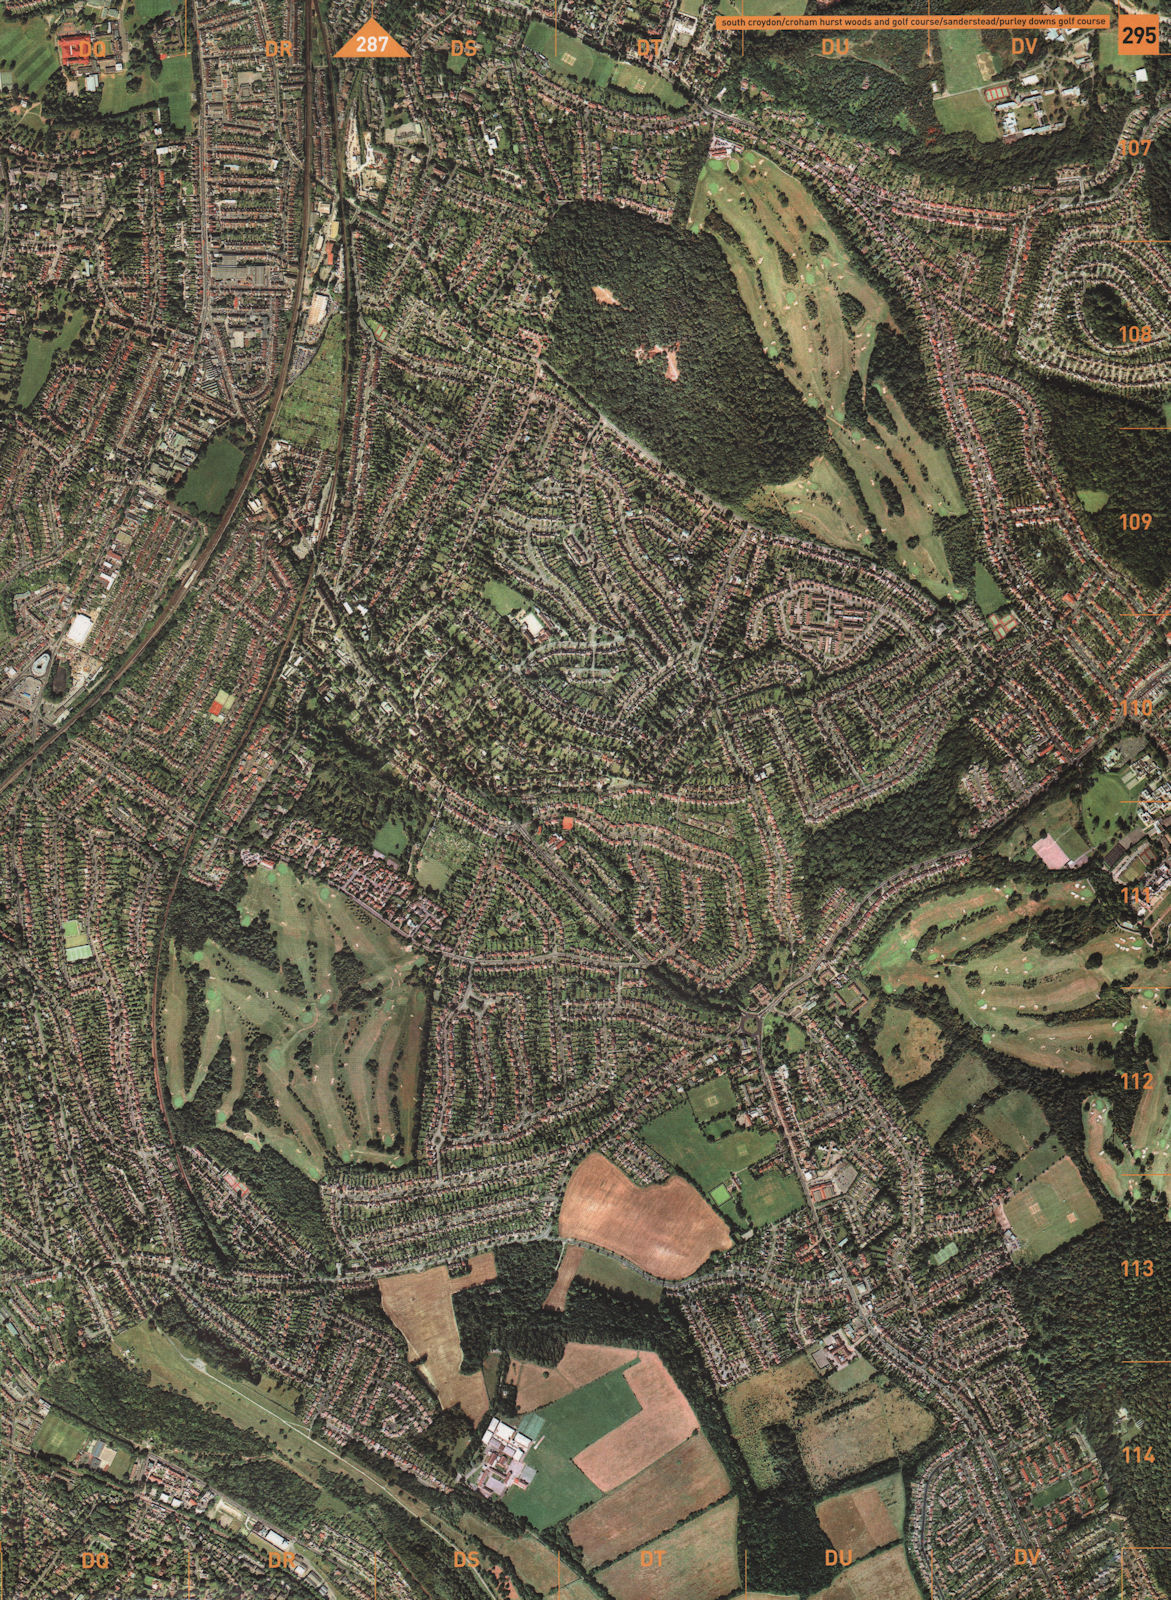 SANDERSTEAD. South Croydon Croham Hurst Woods Purley Downs Golf Course 2000 map